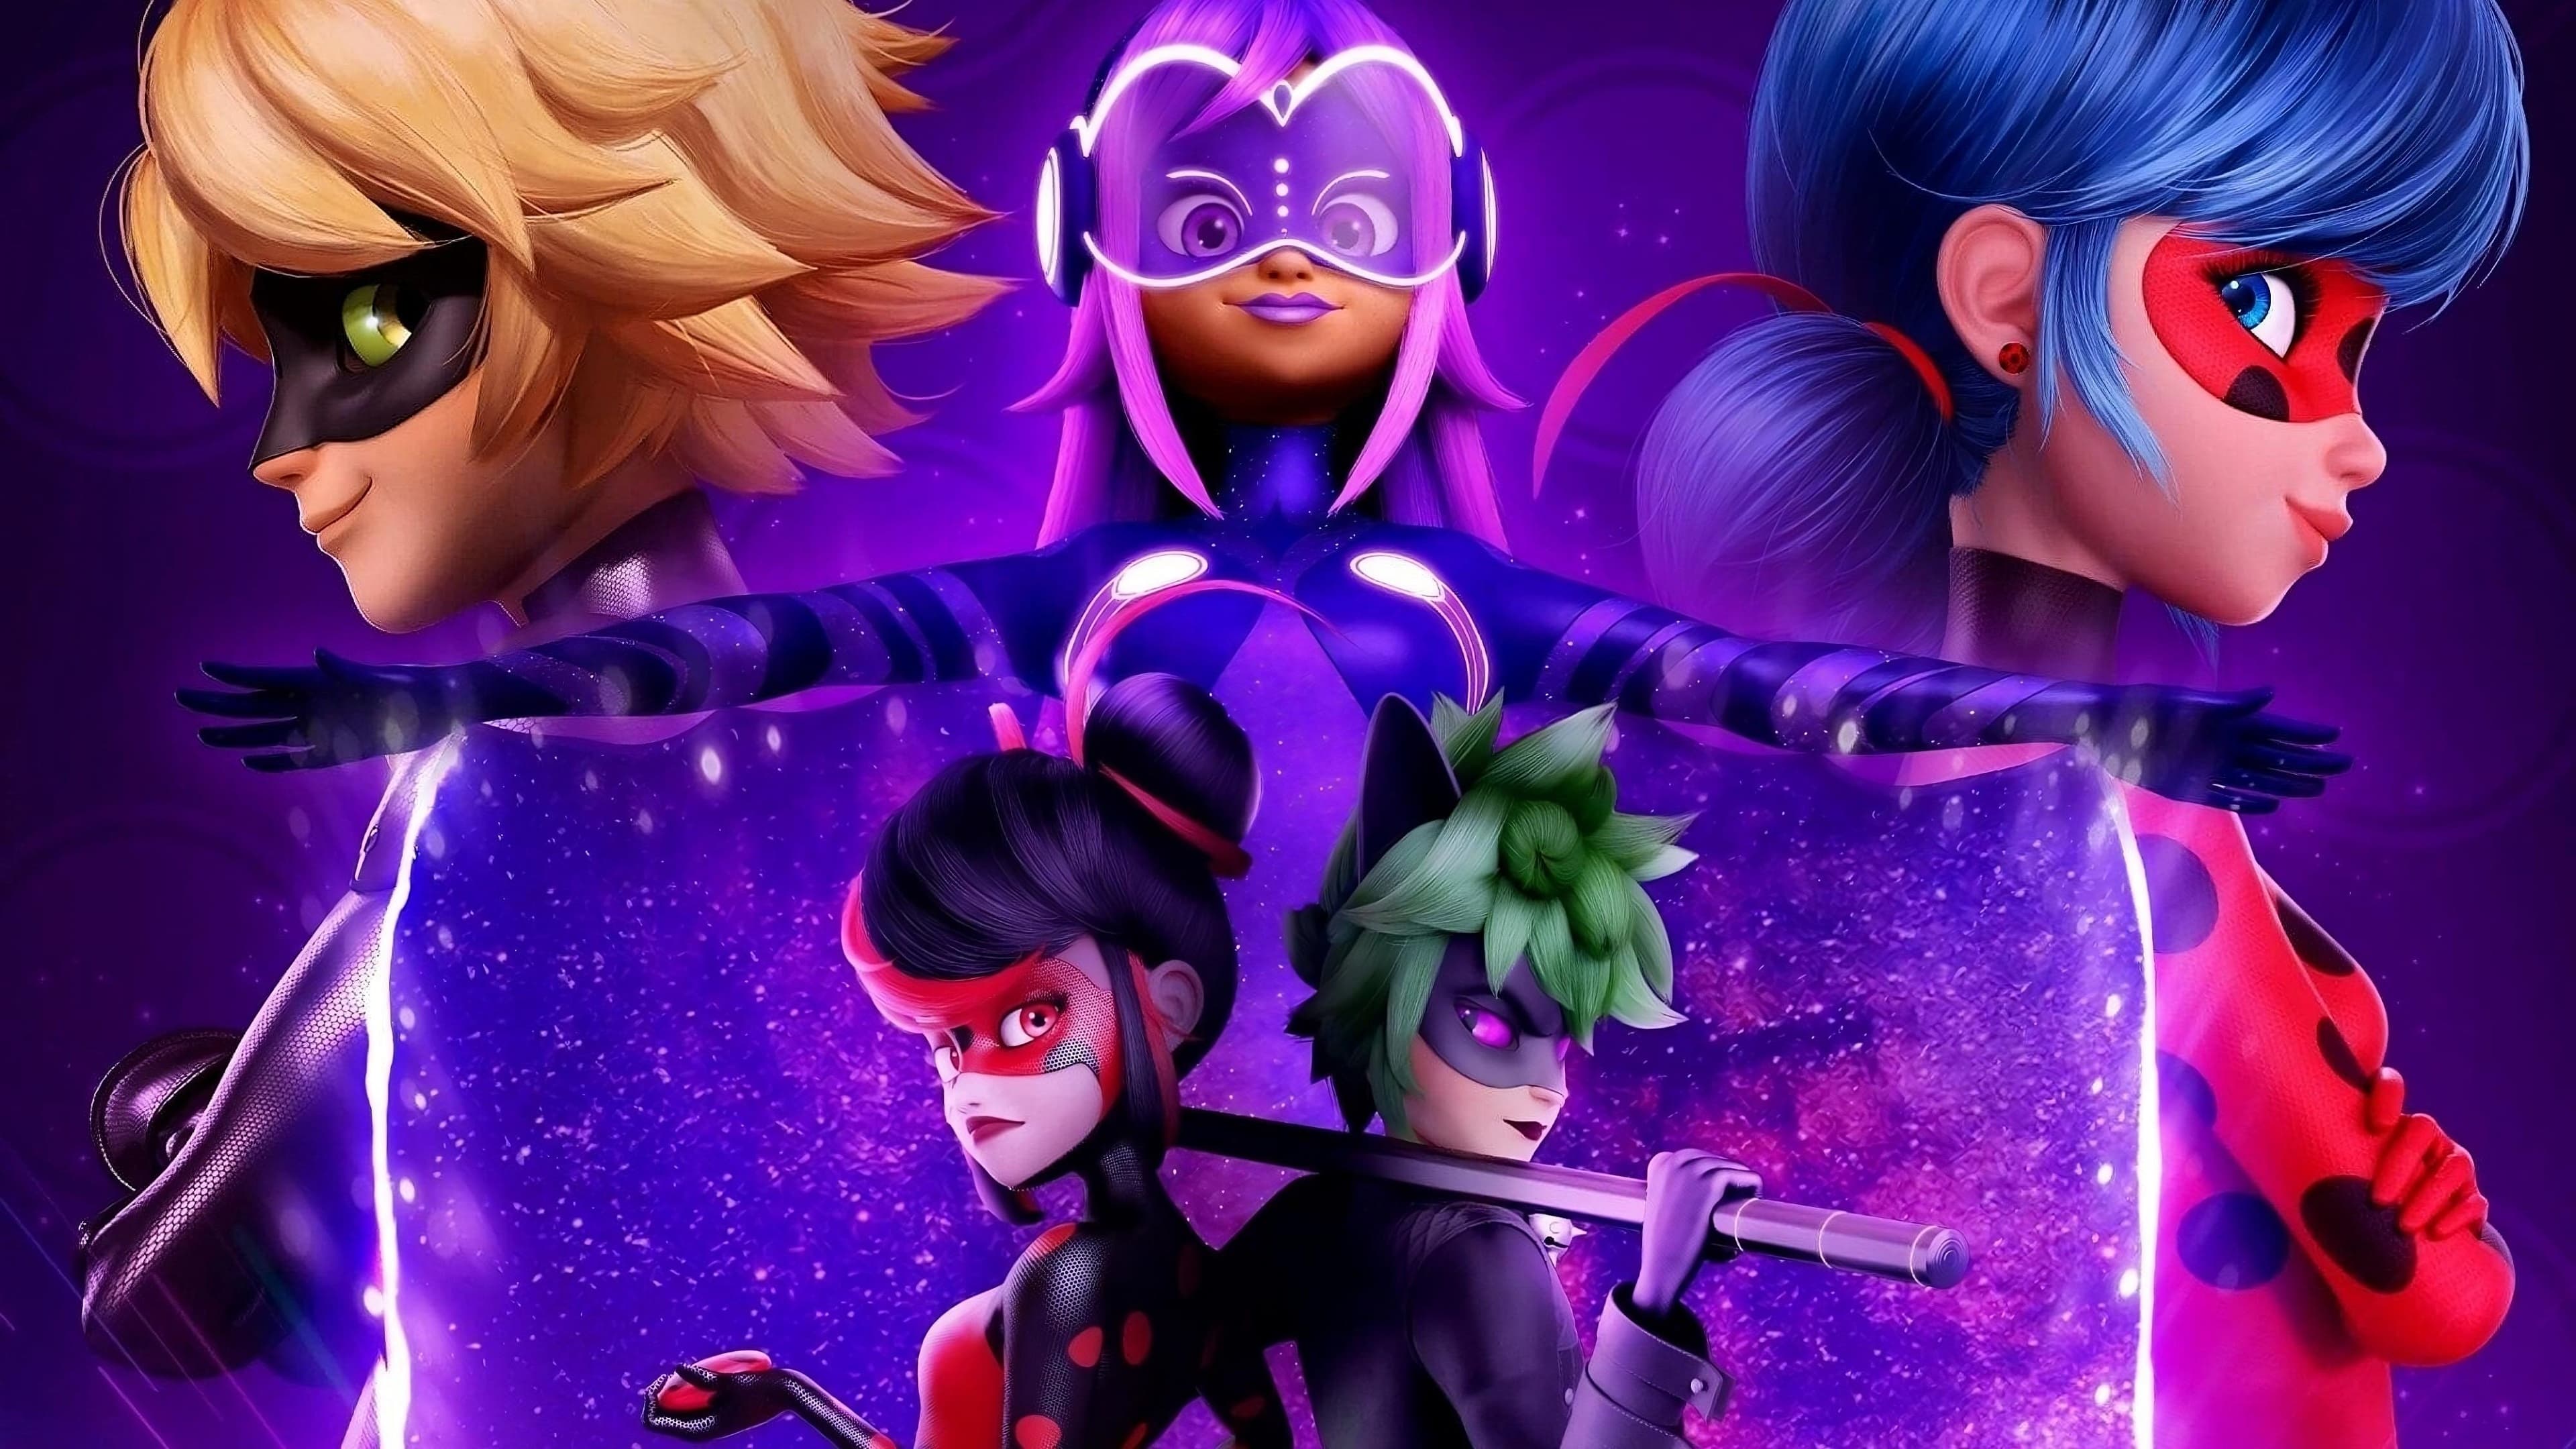 Miraculous World Paris Tales Of Shadybug And Claw Noir Release